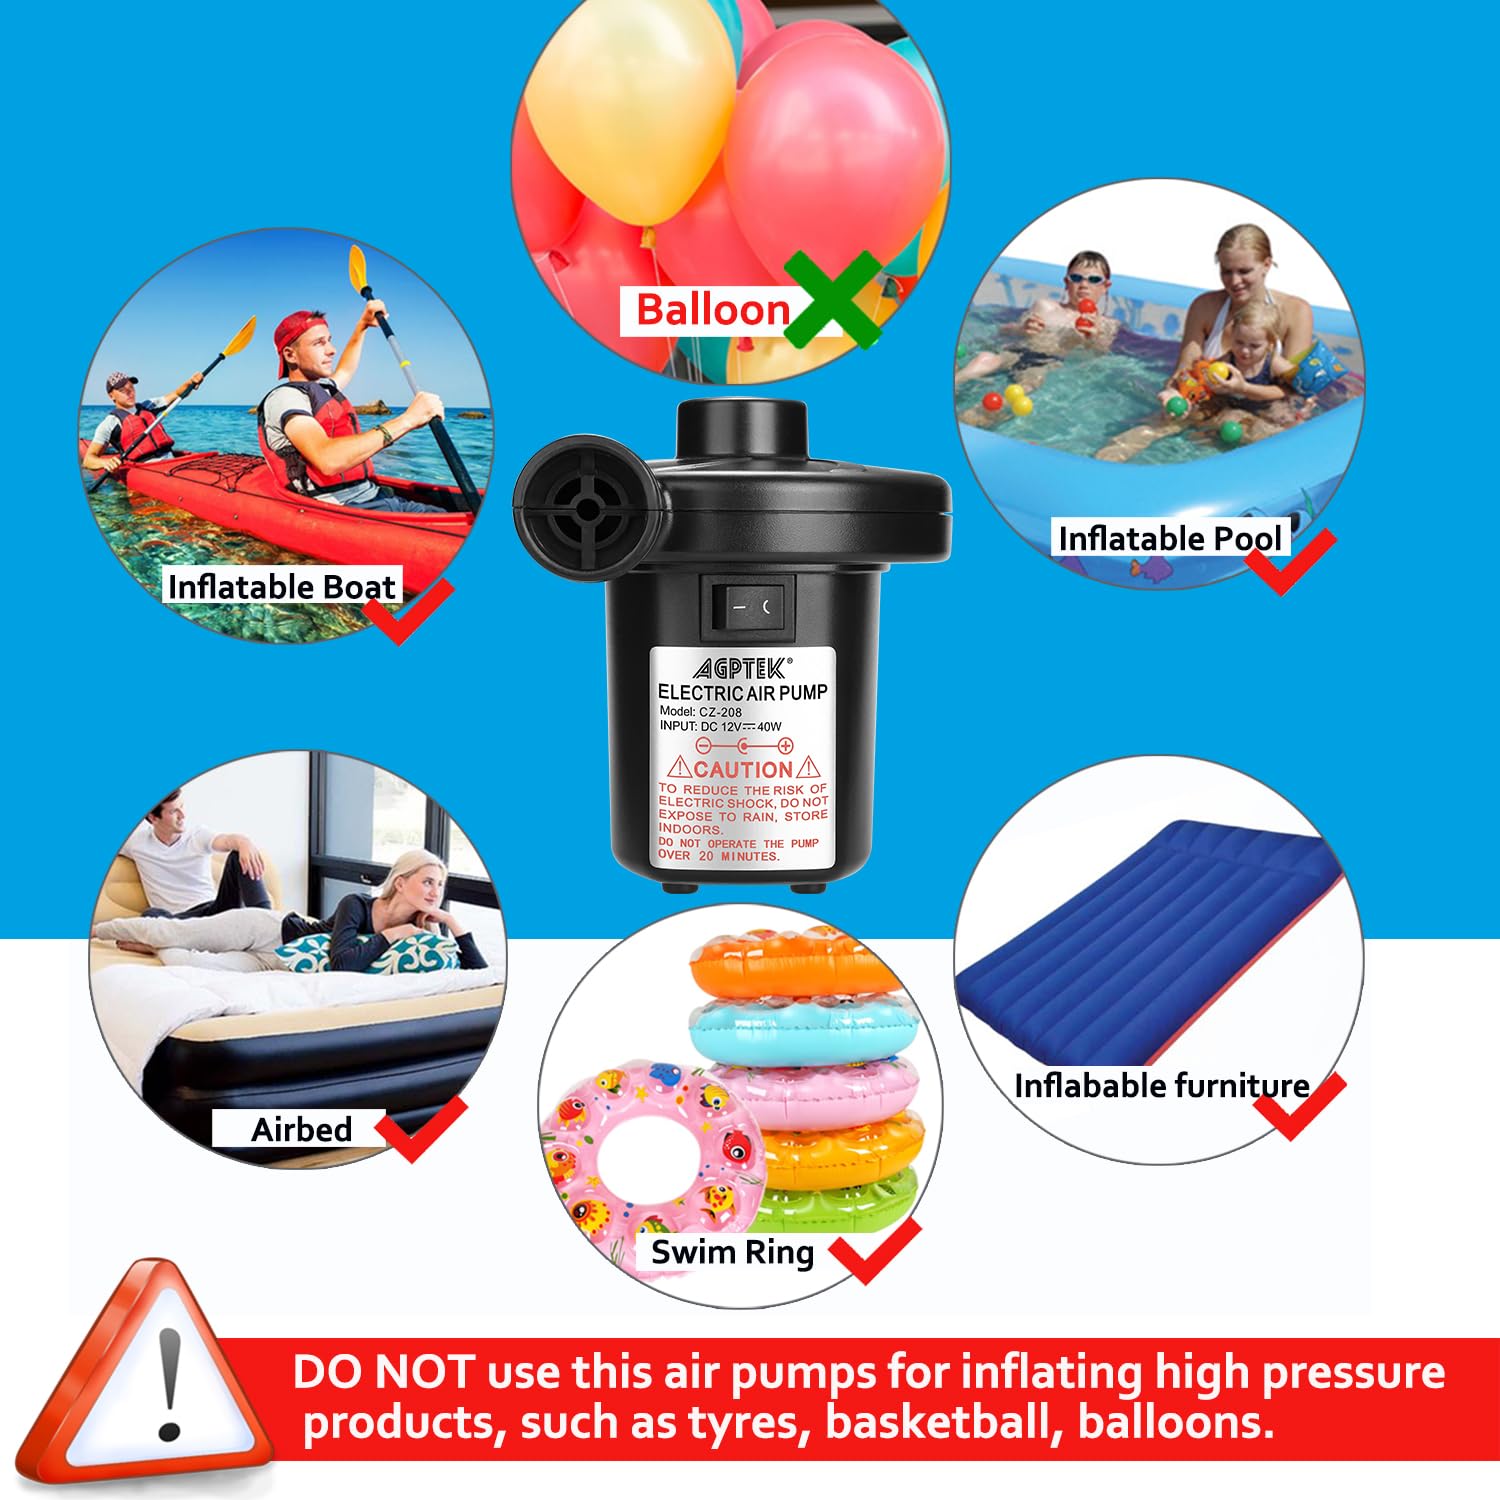 Electric Air Pump, AGPTEK Portable Quick-Fill Air Pump with 3 Nozzles, 110V AC/12V DC, Perfect Inflator/Deflator Pumps for Outdoor Camping, Inflatable Cushions, Air Mattress Beds, Boats, Swimming Ring